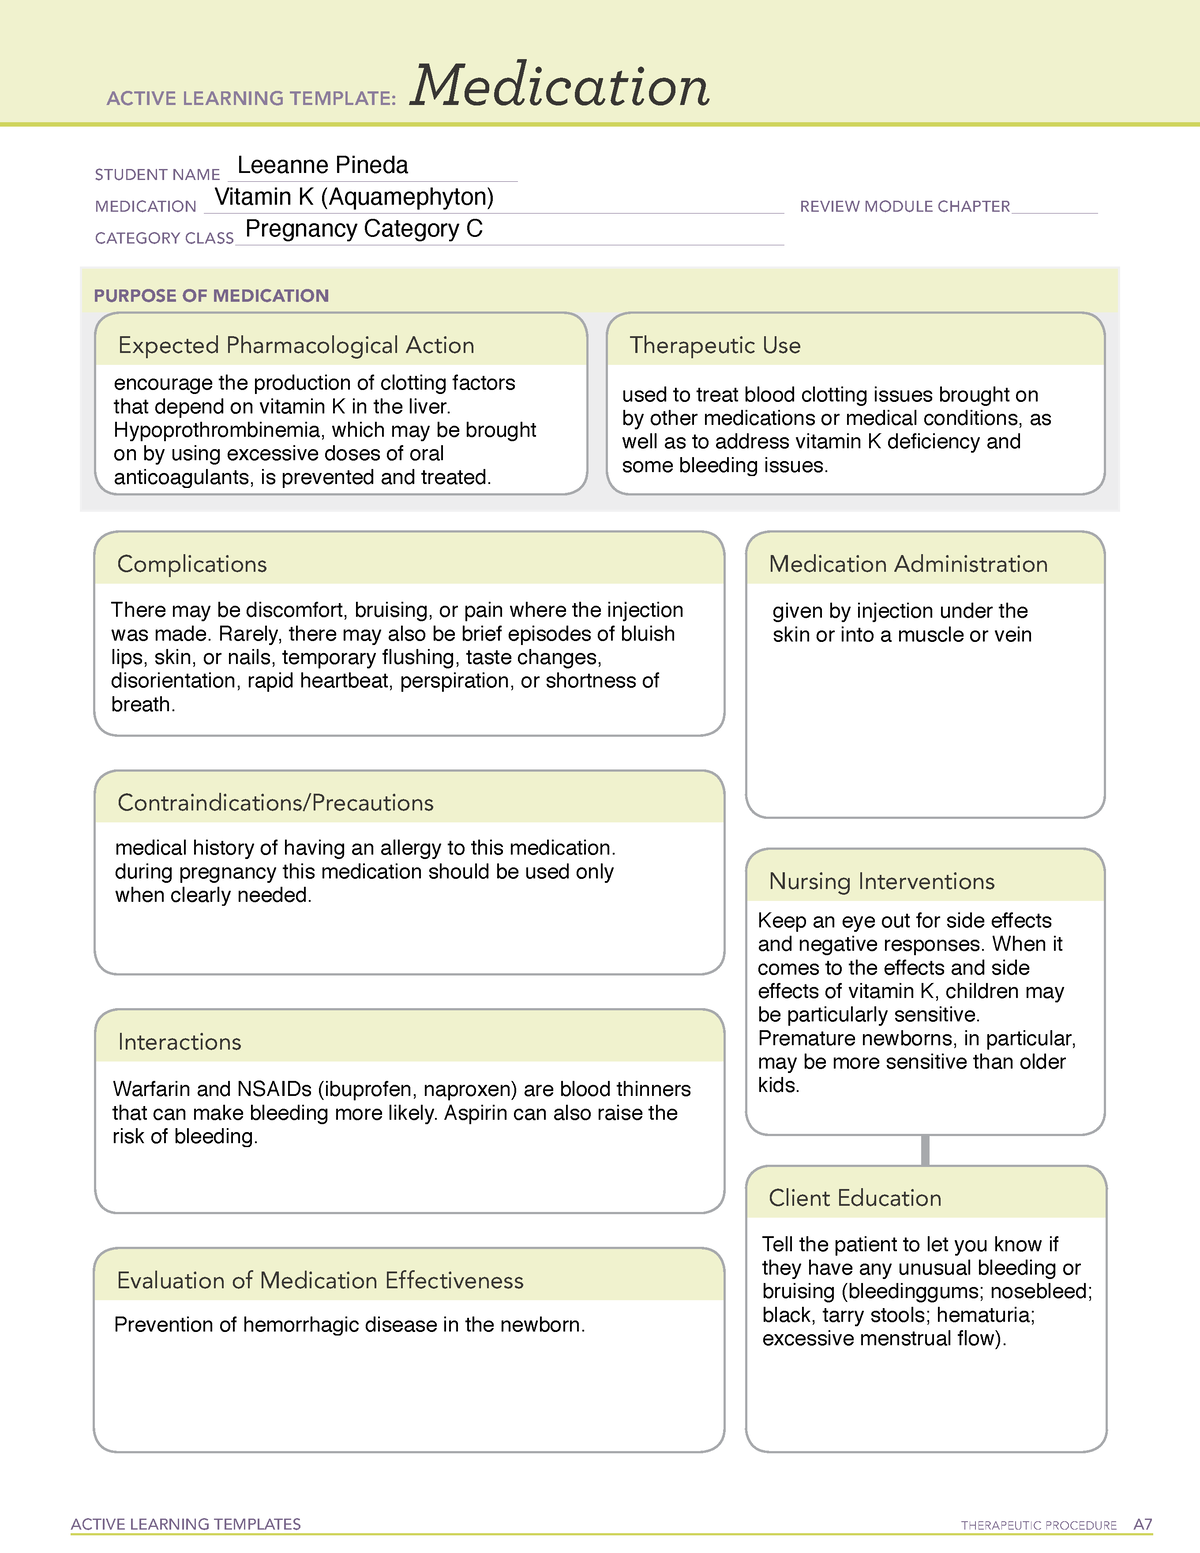 Vitamin K ATI LEARNING TEMPLATE ACTIVE LEARNING TEMPLATES